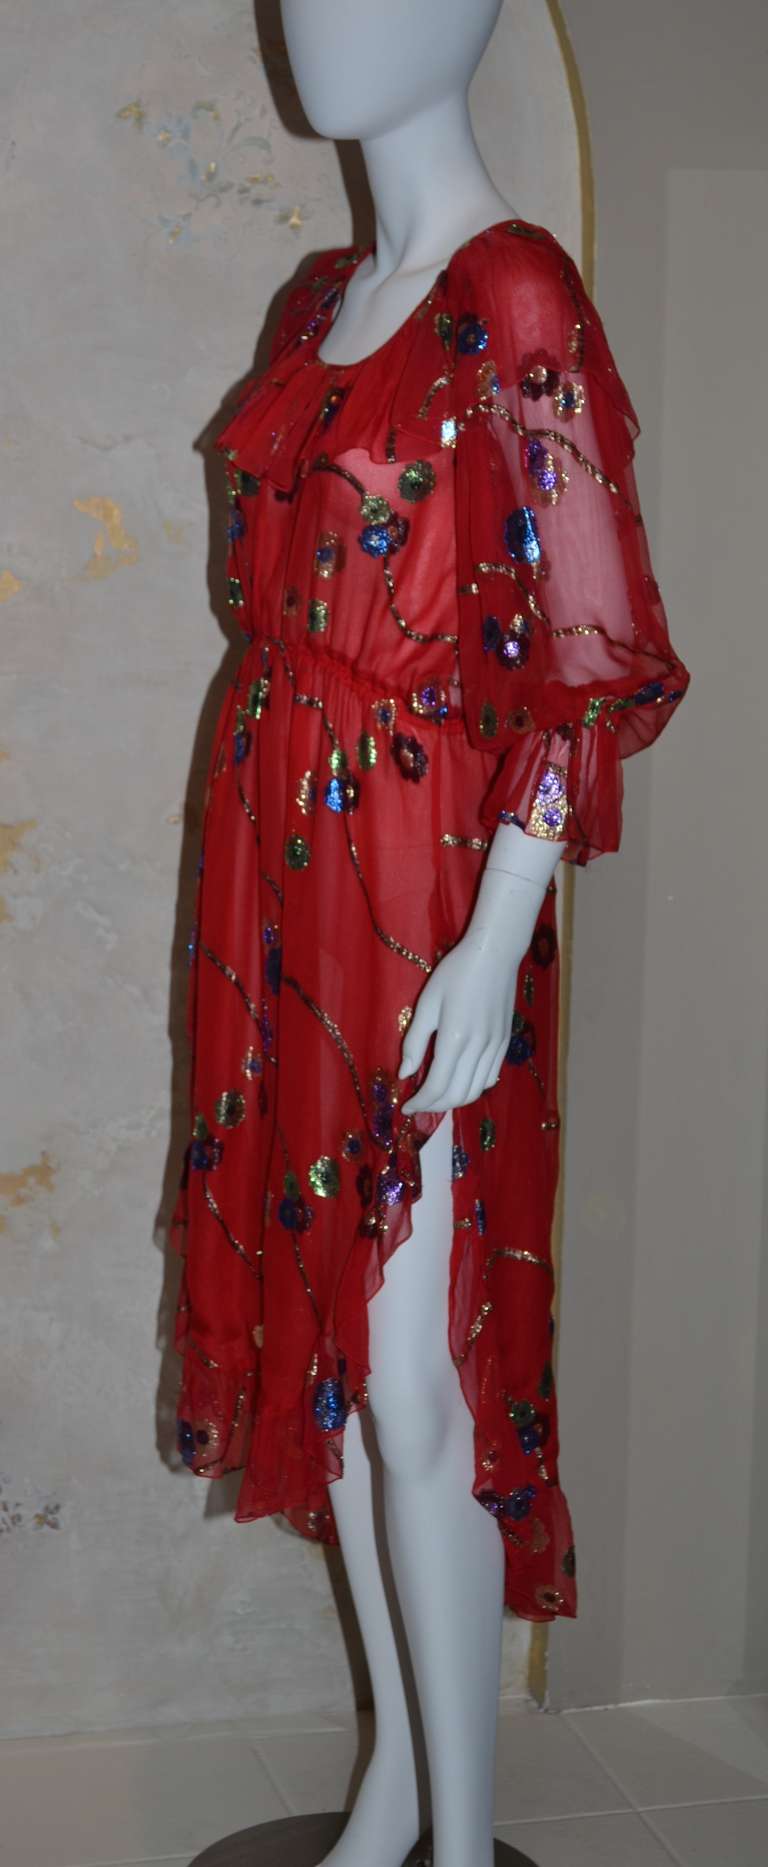 Yves Saint Laurent Vintage YSL Chiffon Dress
Red chiffon with metallic embroidered flowers, elastic waist, peasant neckline, elastic and ruffle at sleeves. Slightly high waisted. French 38 but will fit a 40-42 due to all of the gathering.